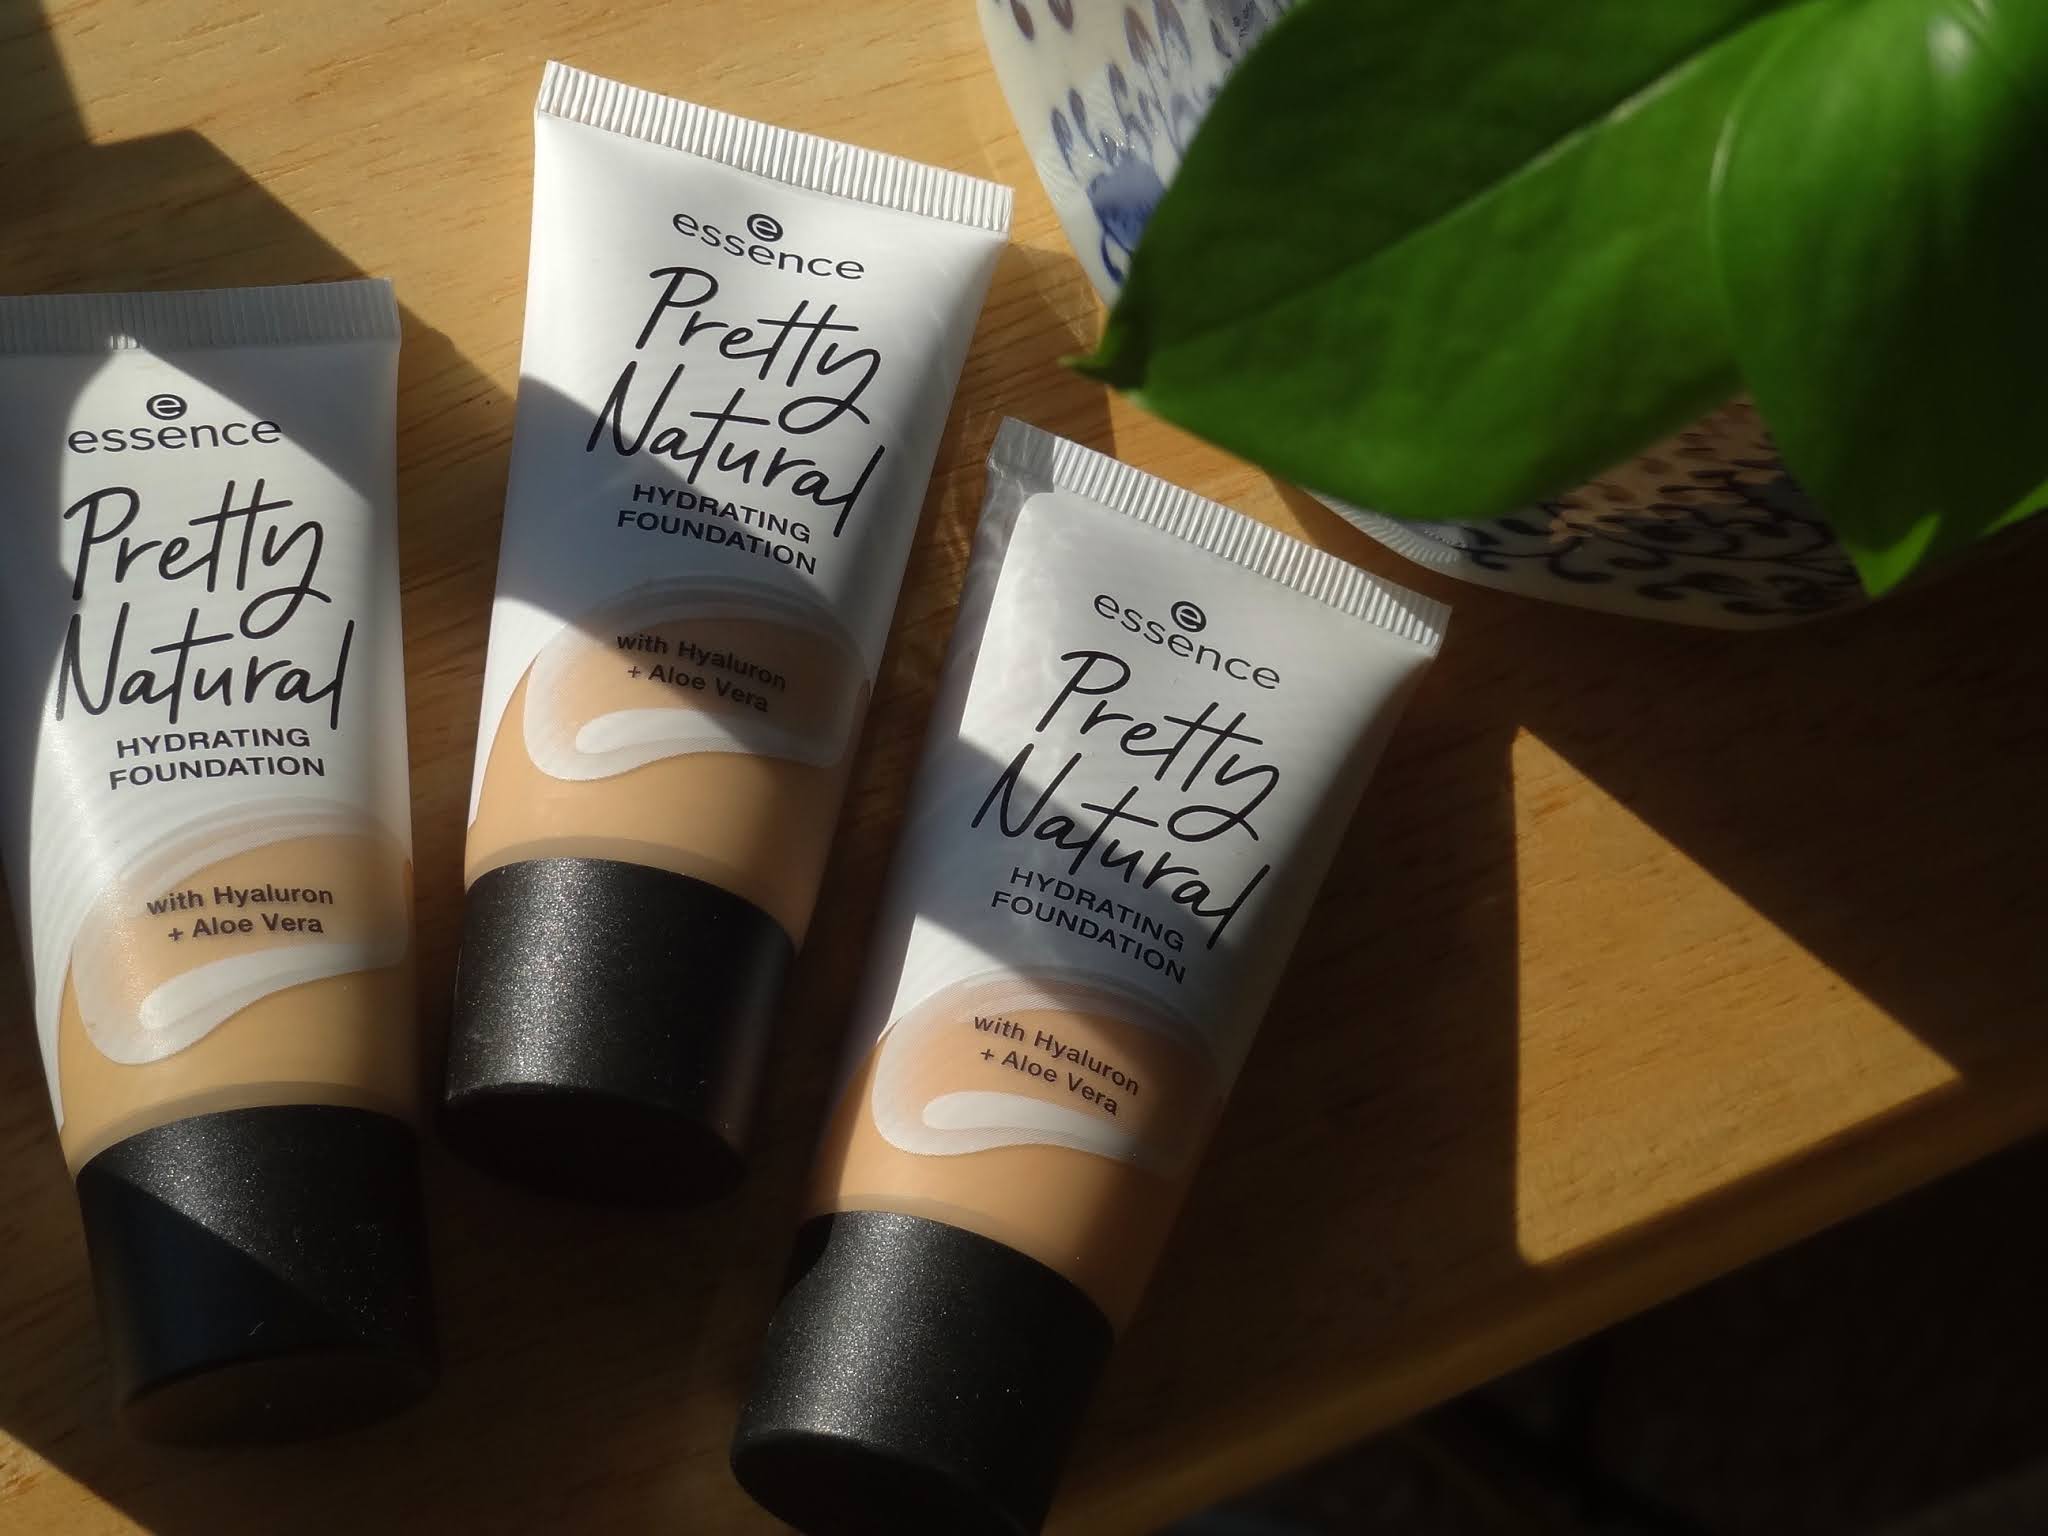 Makeup, Beauty and More: Essence Pretty Natural Hydrating Foundation  Review, Photos, Swatches